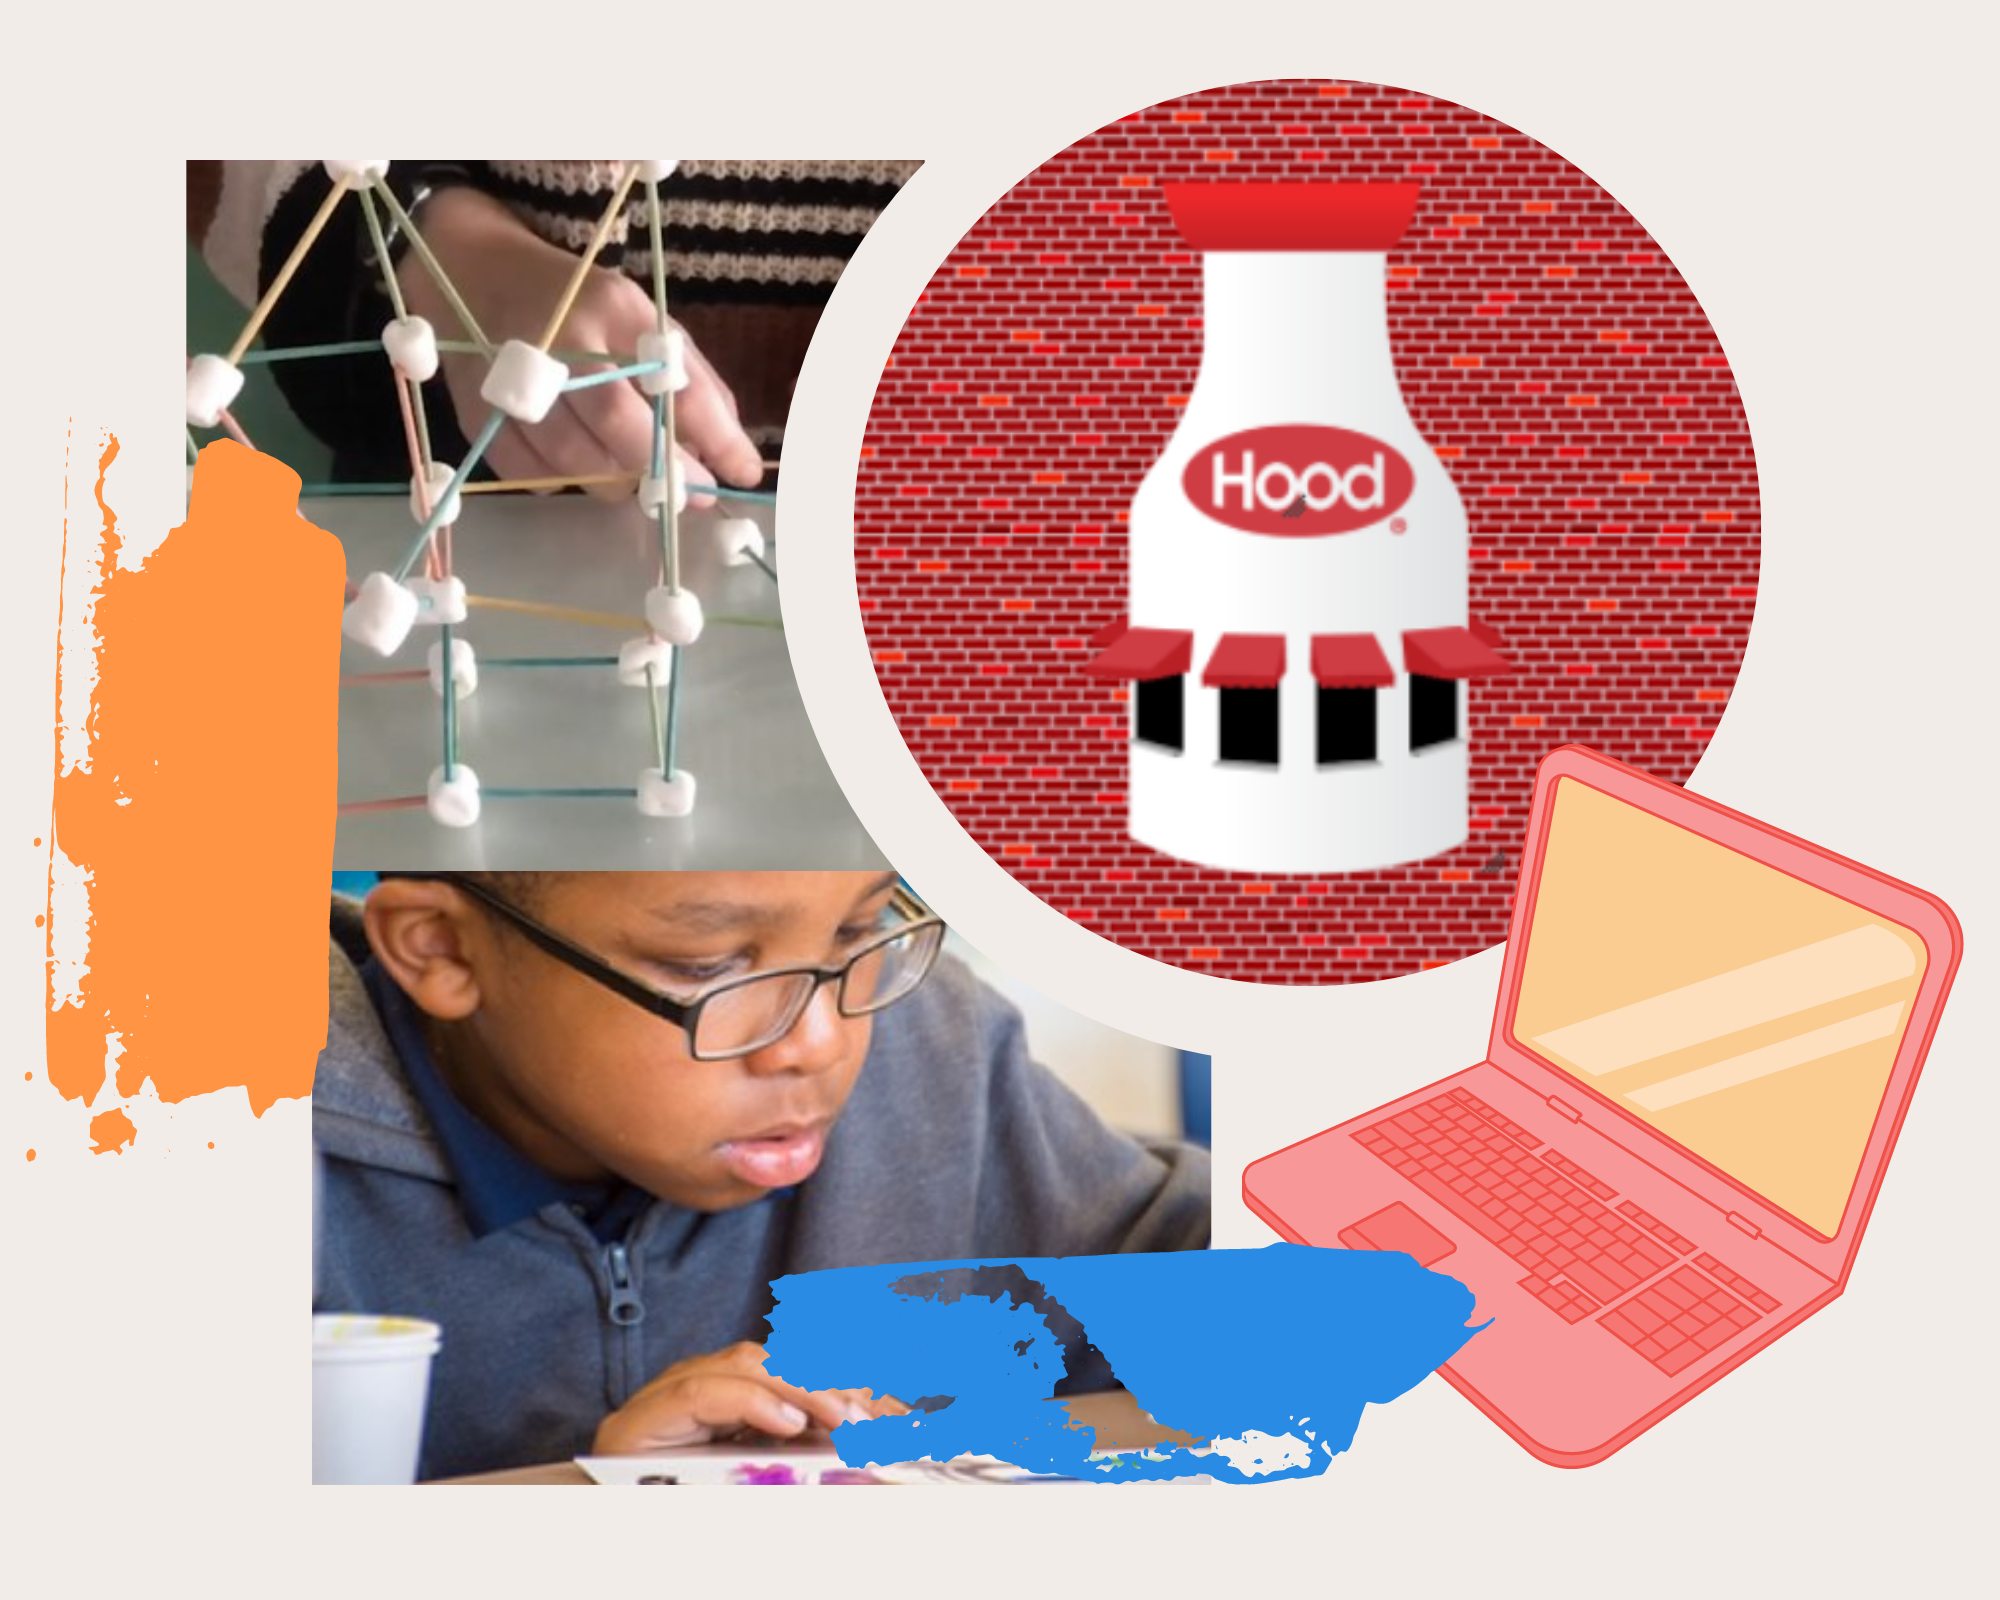 Collage of a child, tppthpick structure, zhood milk bottle, and a laptop